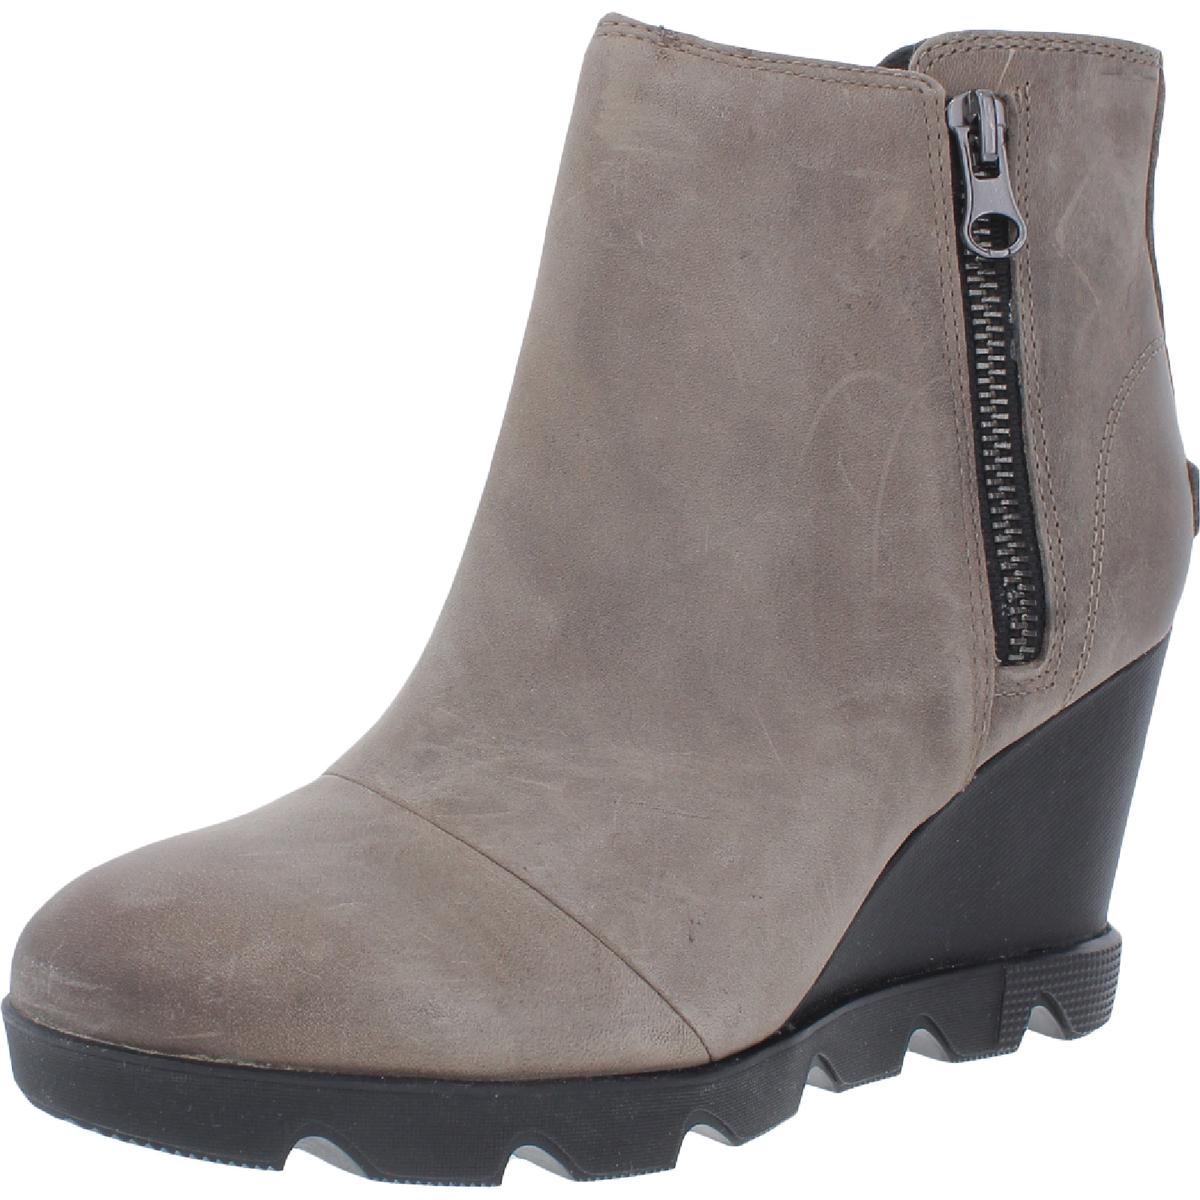 Sorel Joan Uptown Womens Leather Ankle Wedge Boots